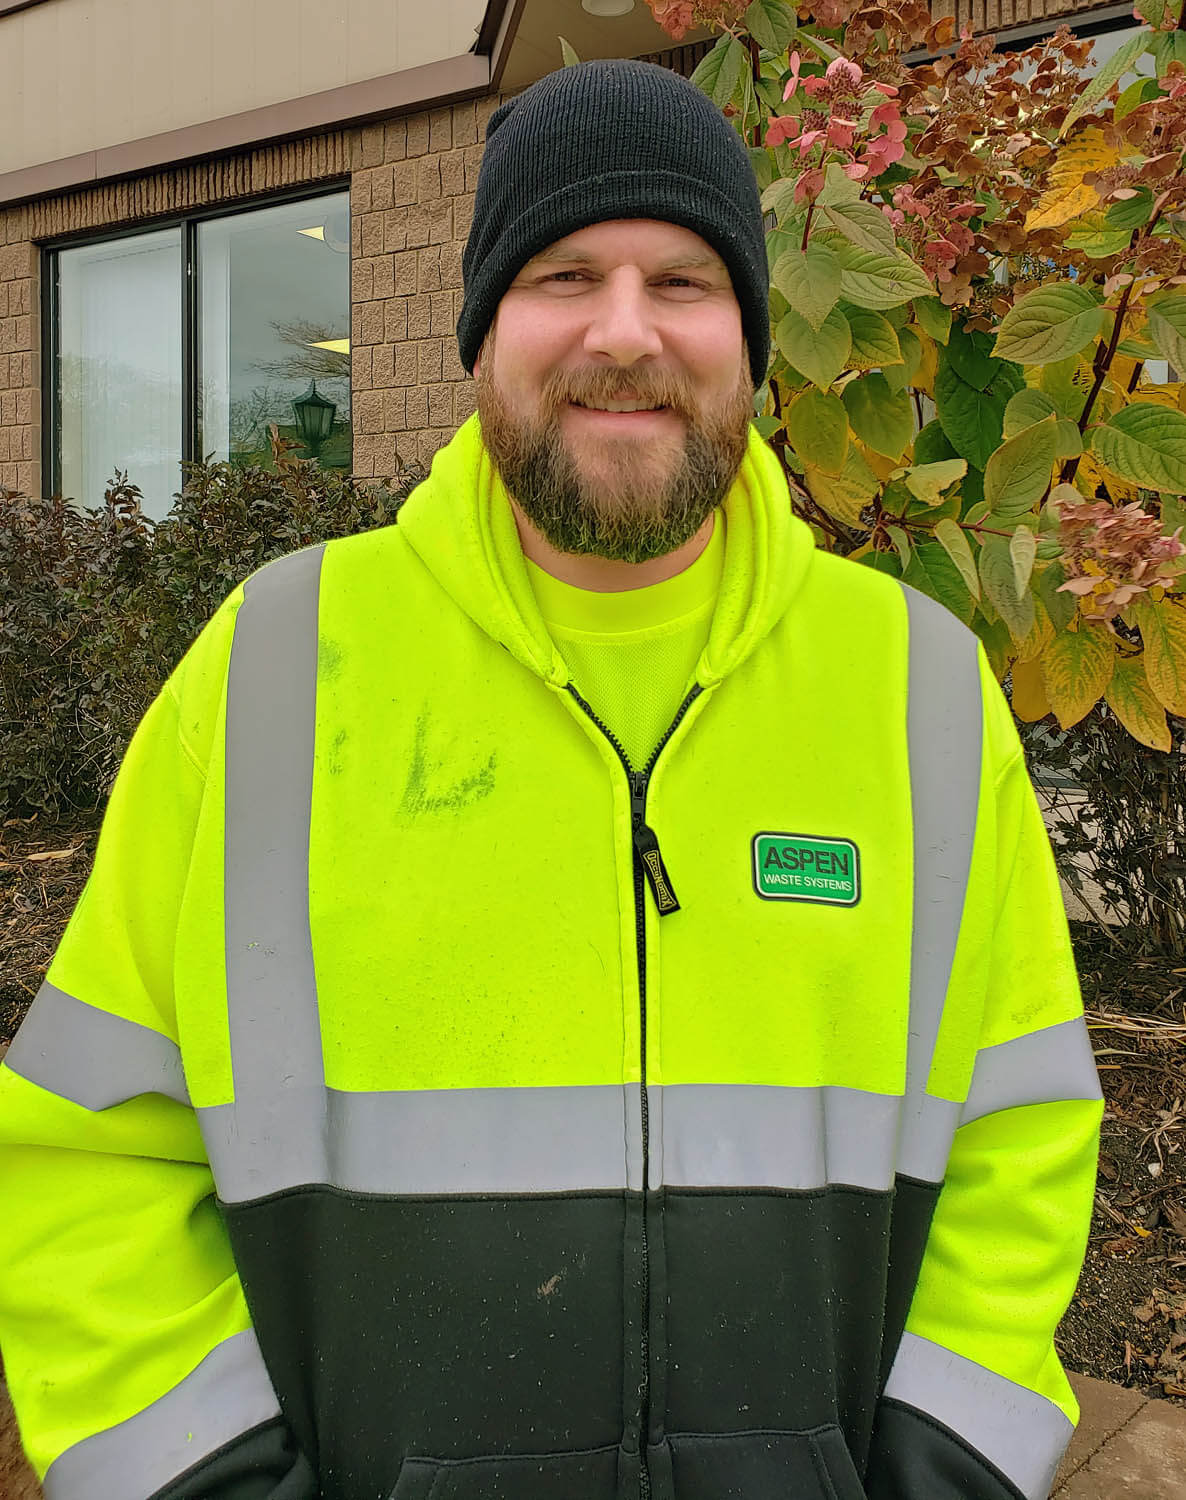 With support from Rise and HCMHC, Cliff finds a great job at Aspen Waste Systems that suits his personality perfectly